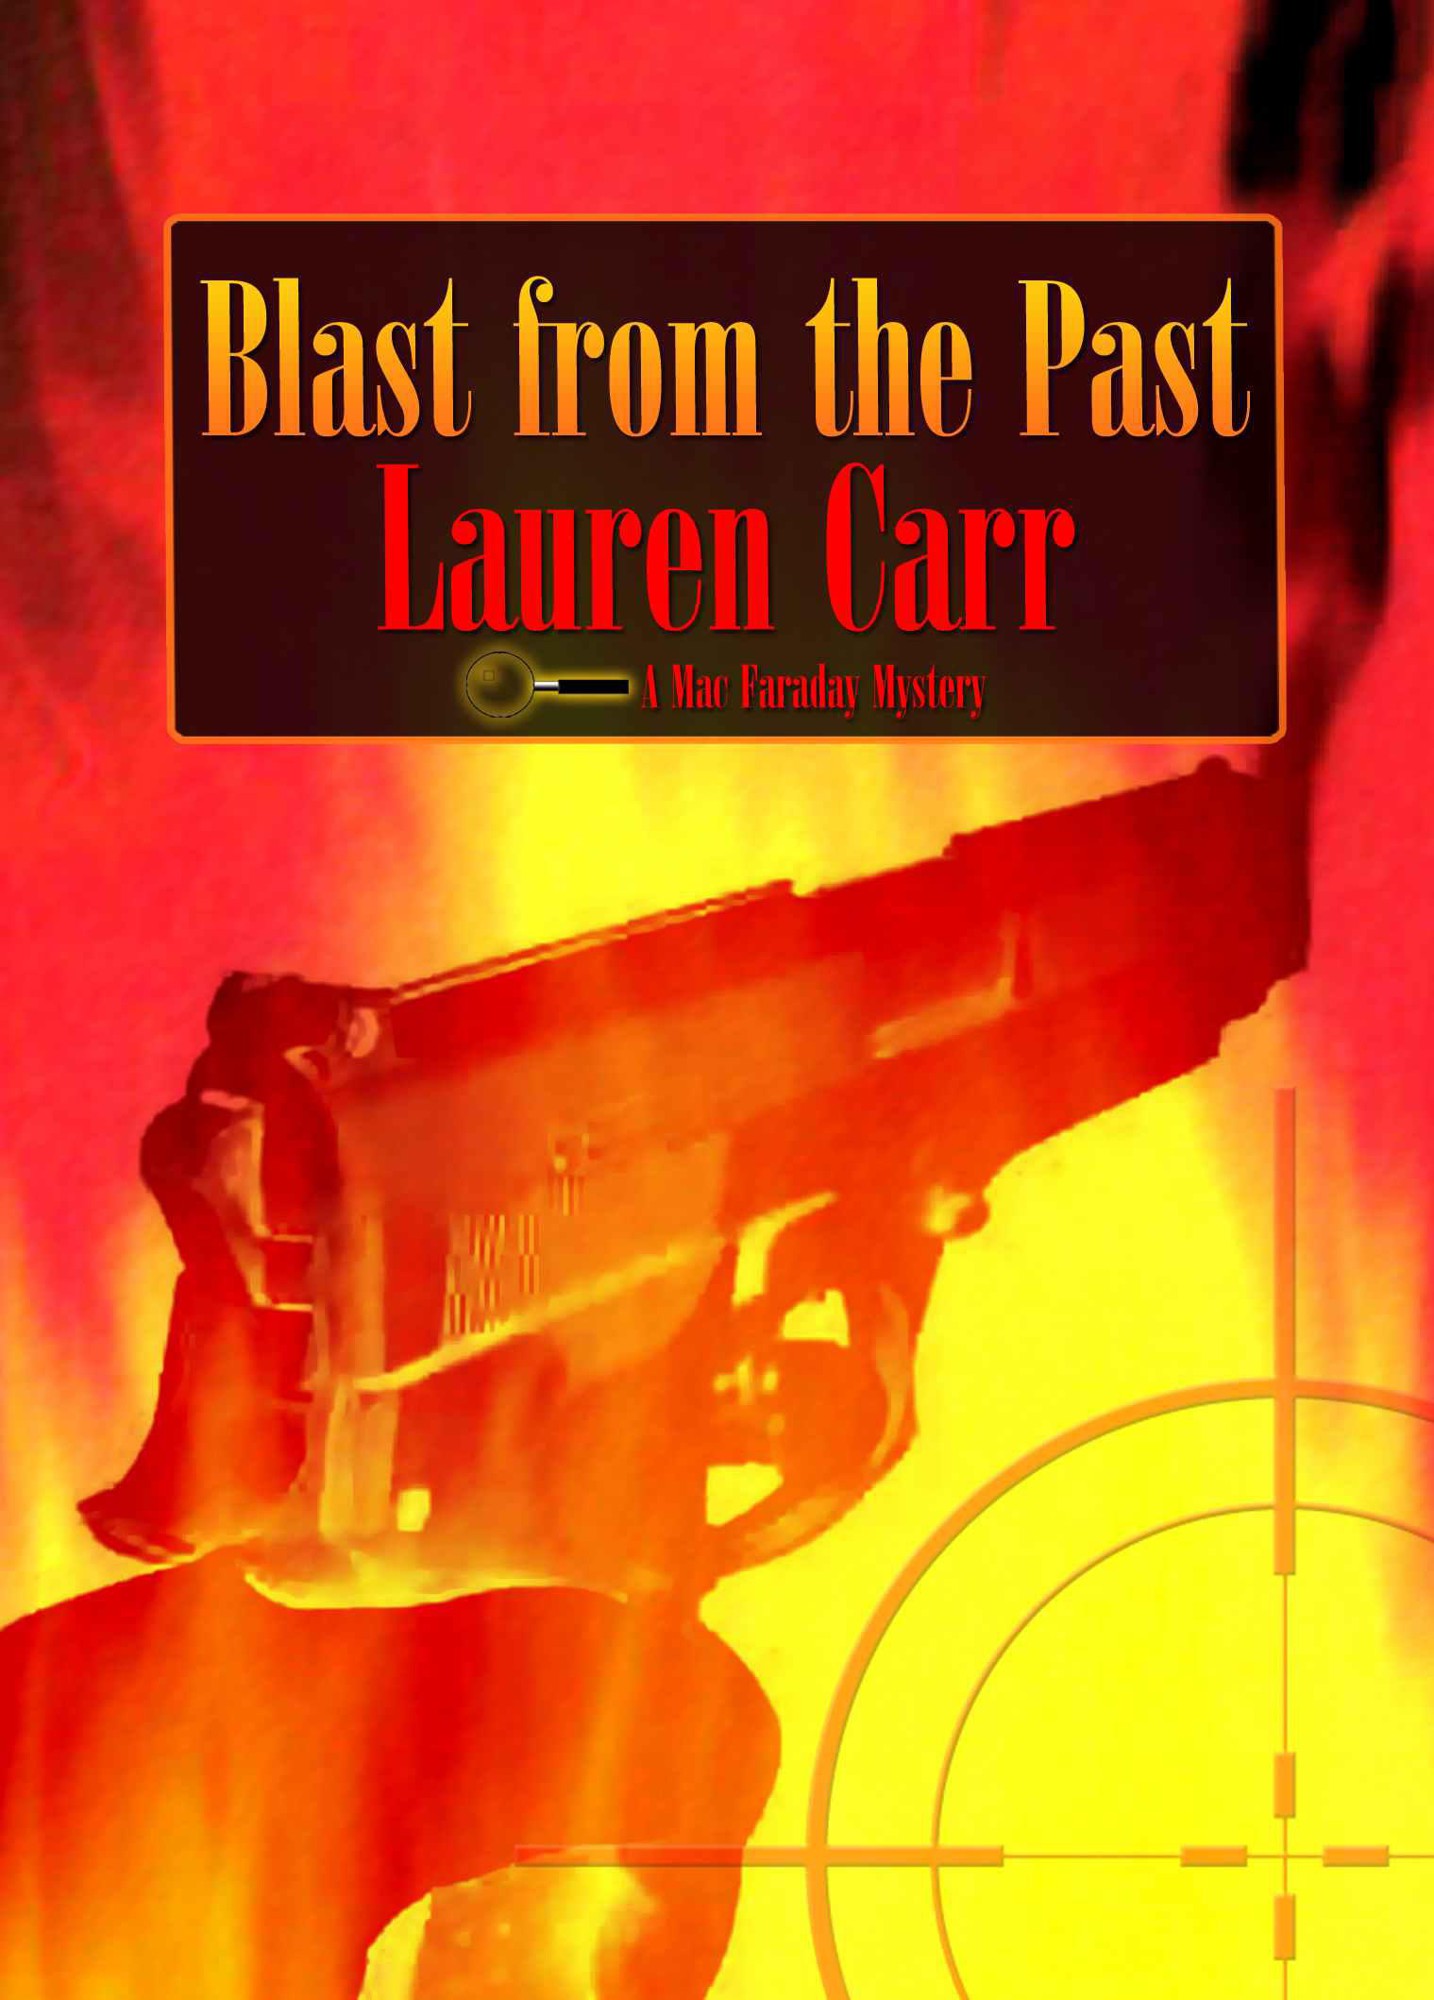 Blast from the Past (A Mac Faraday Mystery Book 4)